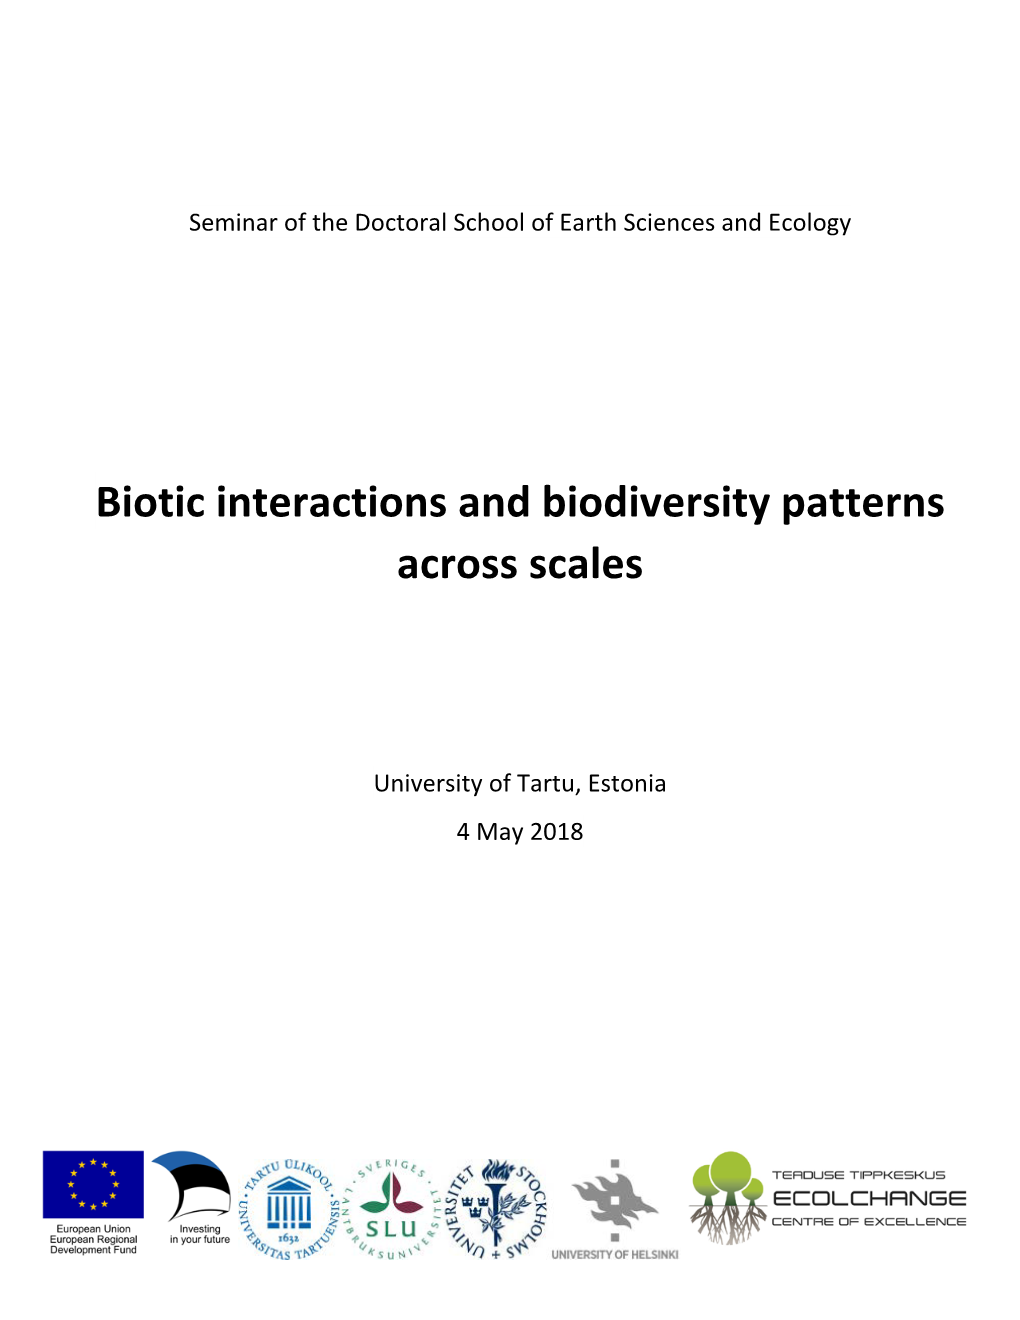 Biotic Interactions and Biodiversity Patterns Across Scales